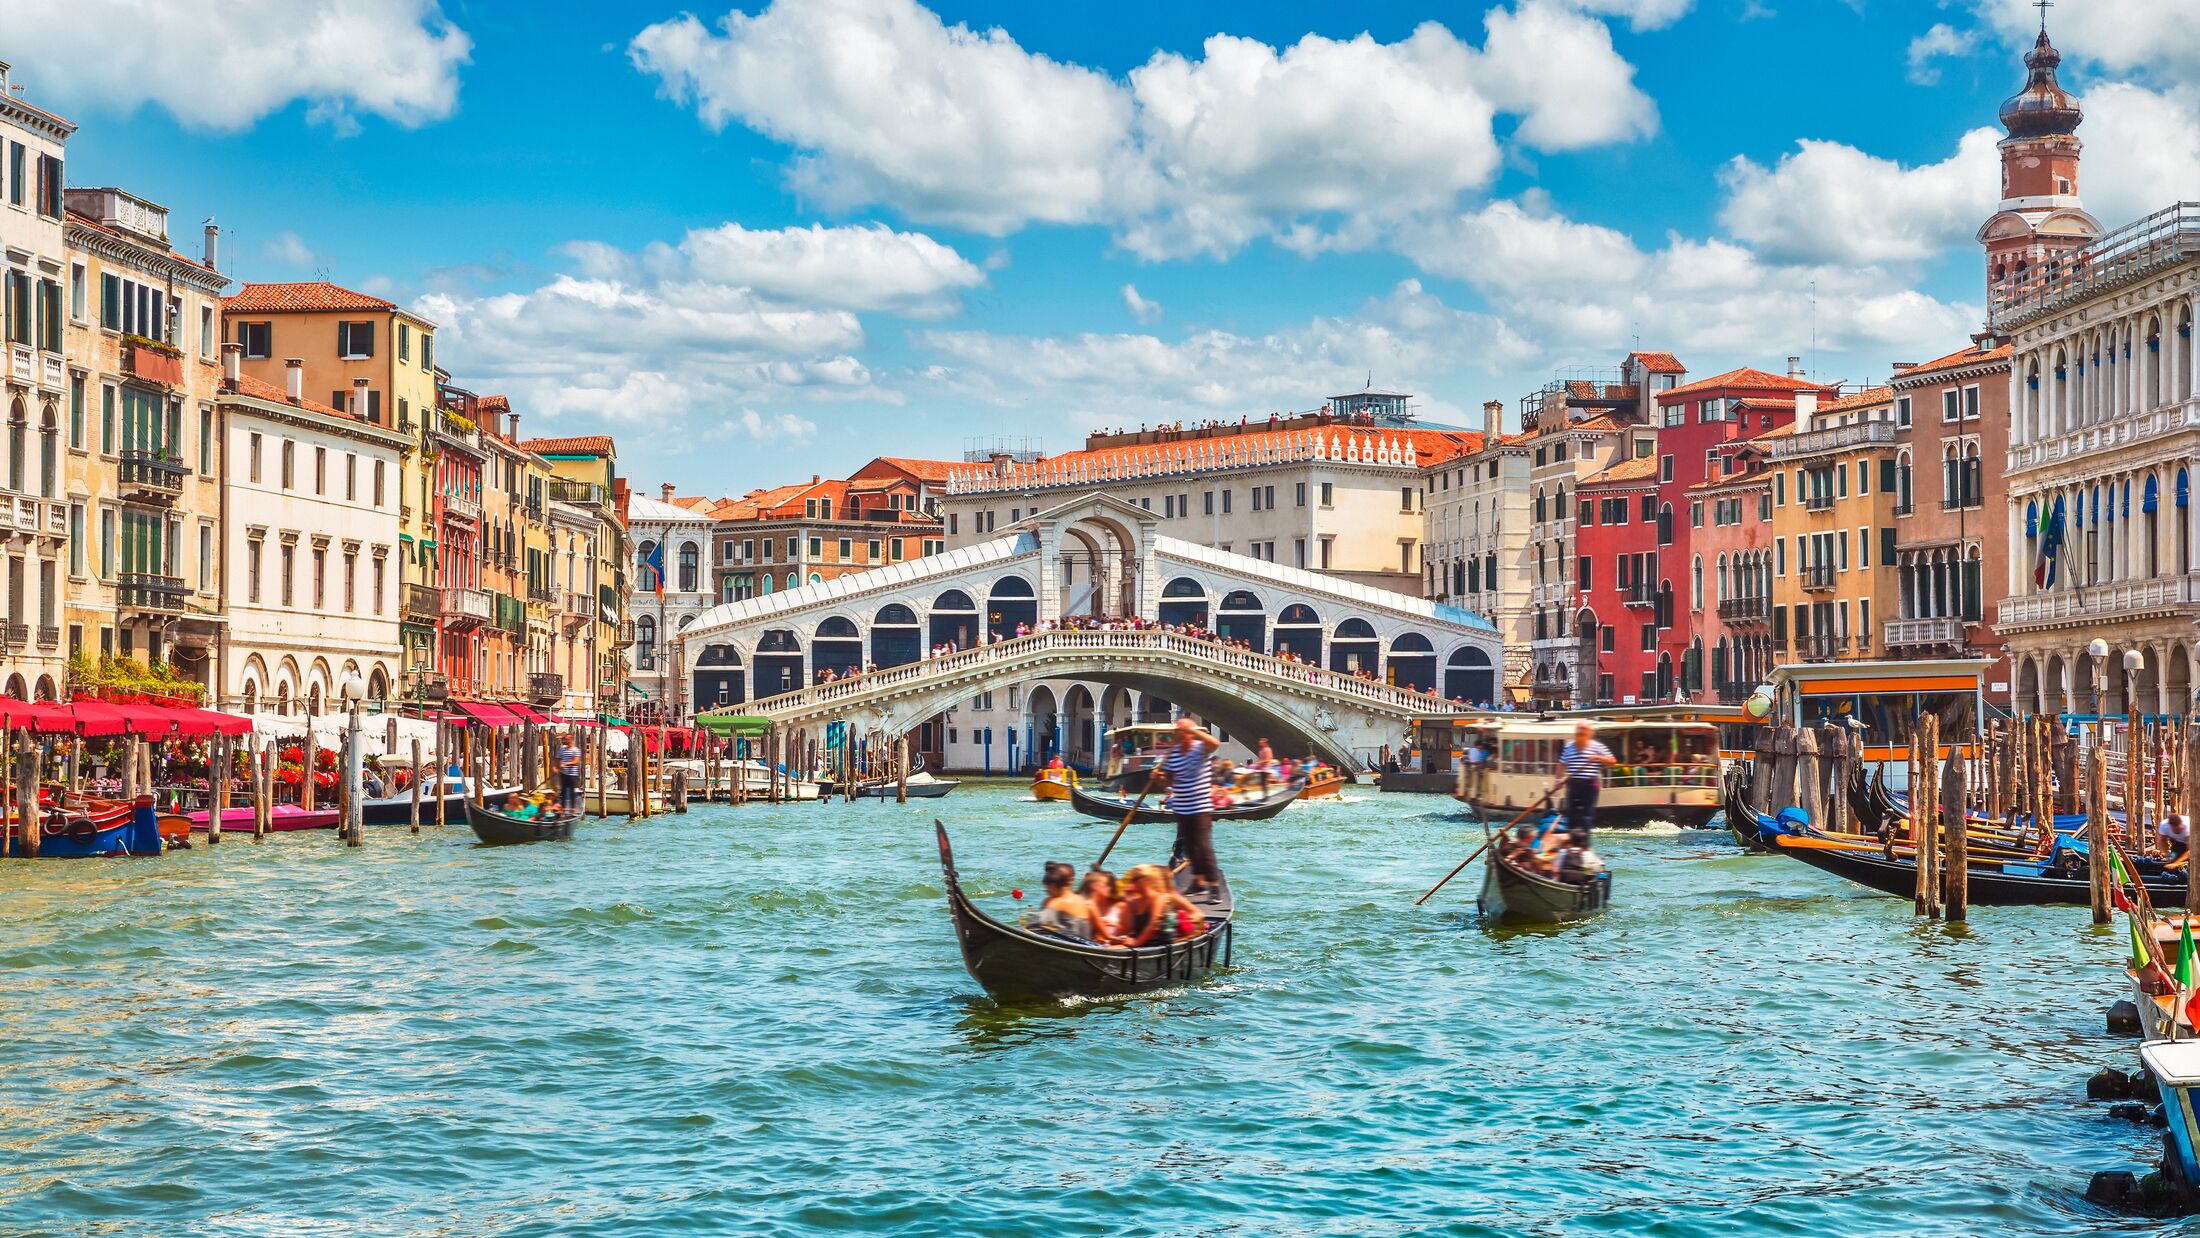 Bridge Rialto on Grand canal famous landmark panoramic view Venice Italy with blue sky white cloud and gondola boat water.